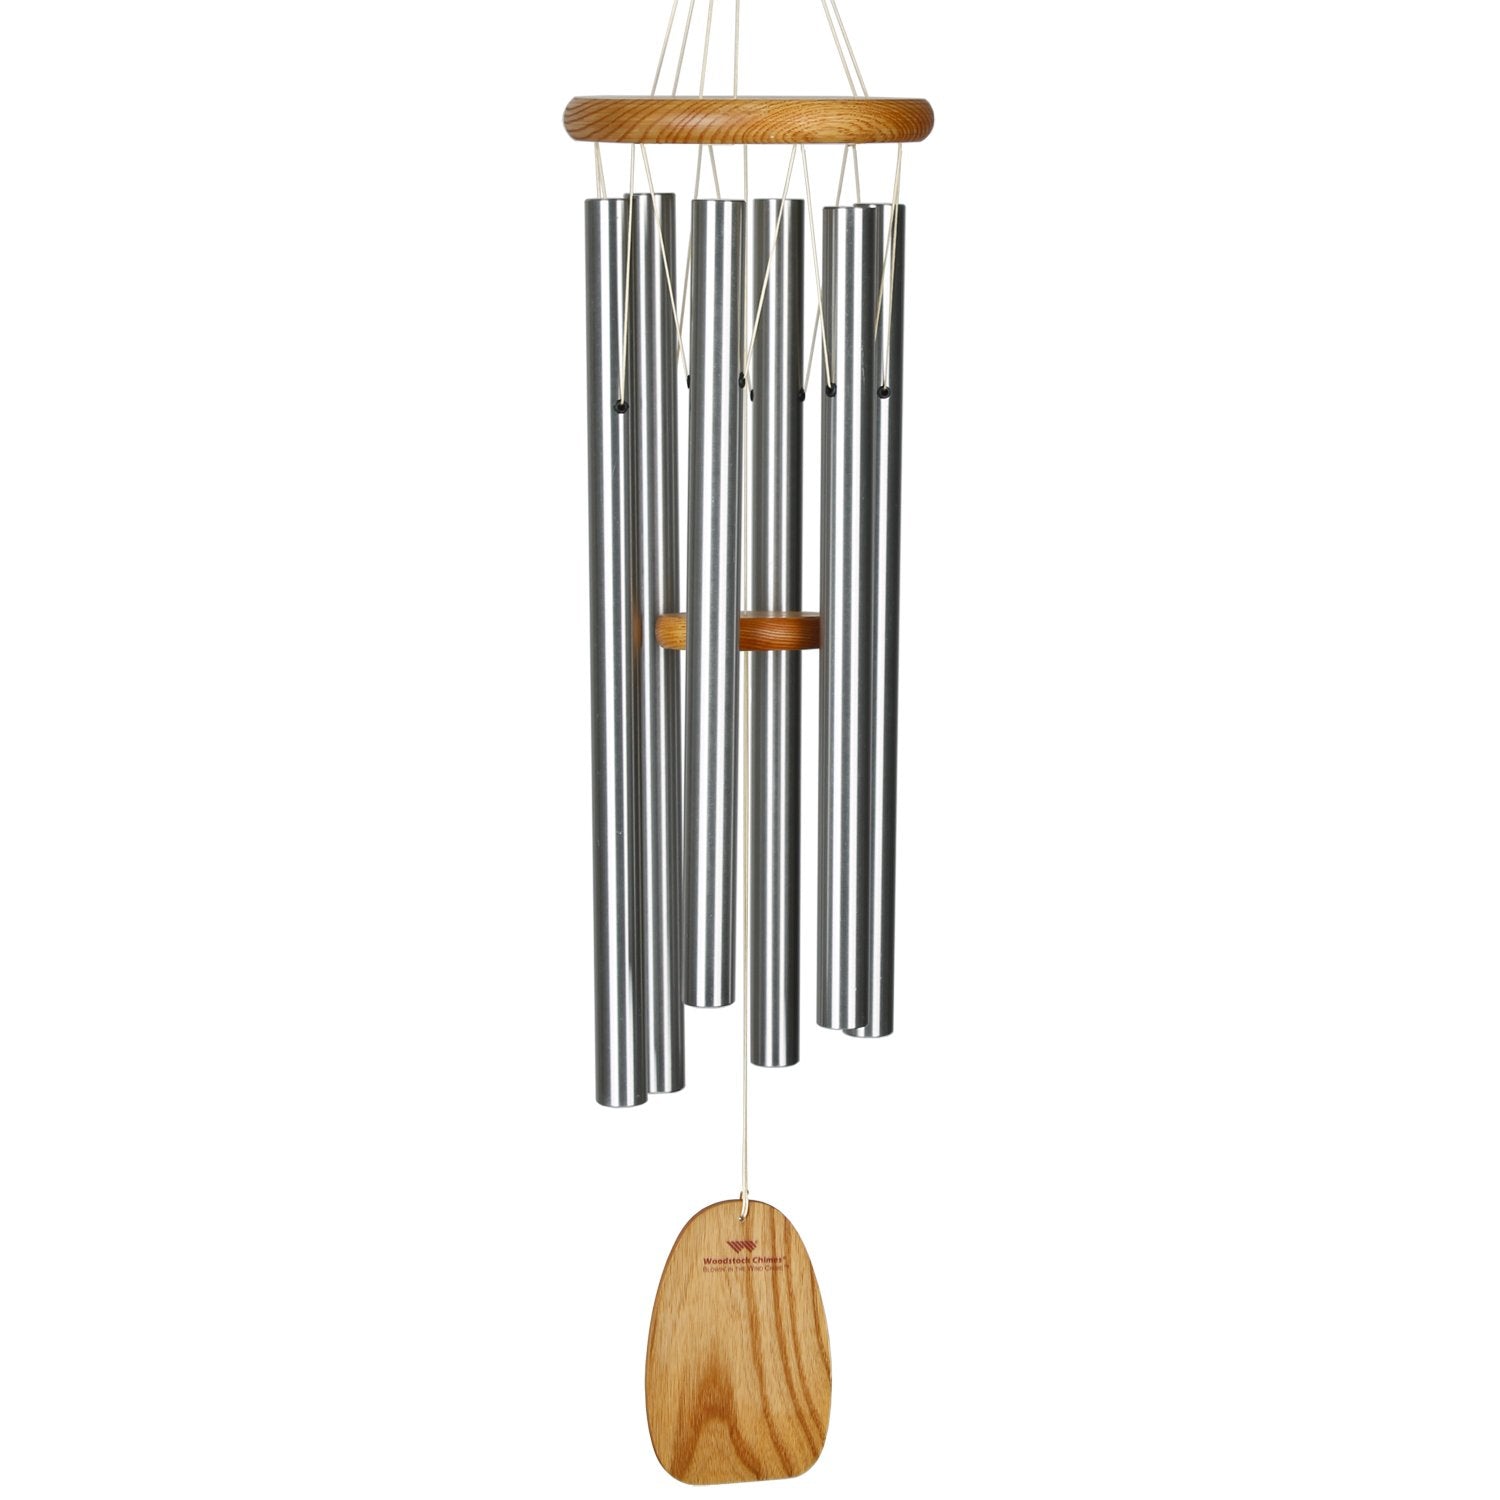 Woodstock Percussion Blowin' in the Wind Chime